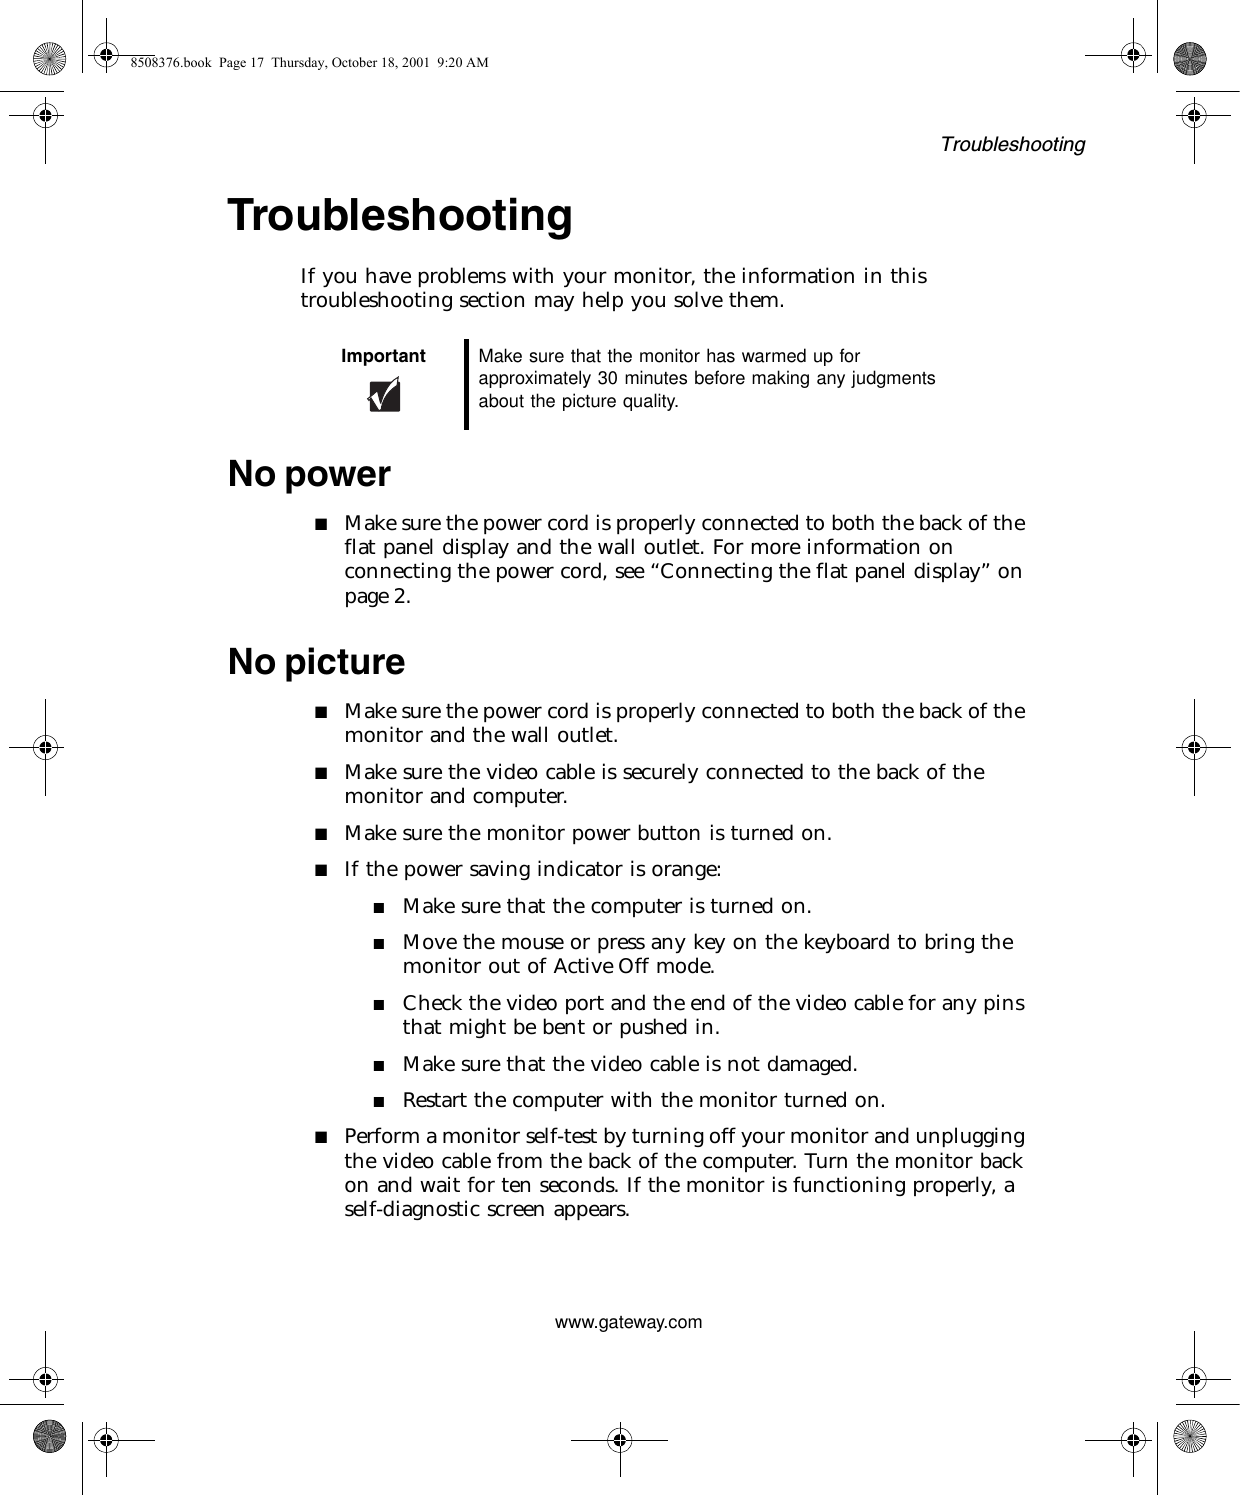 Troubleshootingwww.gateway.comTroubleshootingIf you have problems with your monitor, the information in this troubleshooting section may help you solve them.No power■Make sure the power cord is properly connected to both the back of the flat panel display and the wall outlet. For more information on connecting the power cord, see “Connecting the flat panel display” on page 2.No picture■Make sure the power cord is properly connected to both the back of the monitor and the wall outlet.■Make sure the video cable is securely connected to the back of the monitor and computer.■Make sure the monitor power button is turned on.■If the power saving indicator is orange:■Make sure that the computer is turned on.■Move the mouse or press any key on the keyboard to bring the monitor out of Active Off mode.■Check the video port and the end of the video cable for any pins that might be bent or pushed in.■Make sure that the video cable is not damaged.■Restart the computer with the monitor turned on.■Perform a monitor self-test by turning off your monitor and unplugging the video cable from the back of the computer. Turn the monitor back on and wait for ten seconds. If the monitor is functioning properly, a self-diagnostic screen appears.Important Make sure that the monitor has warmed up for approximately 30 minutes before making any judgments about the picture quality.8508376.book  Page 17  Thursday, October 18, 2001  9:20 AM